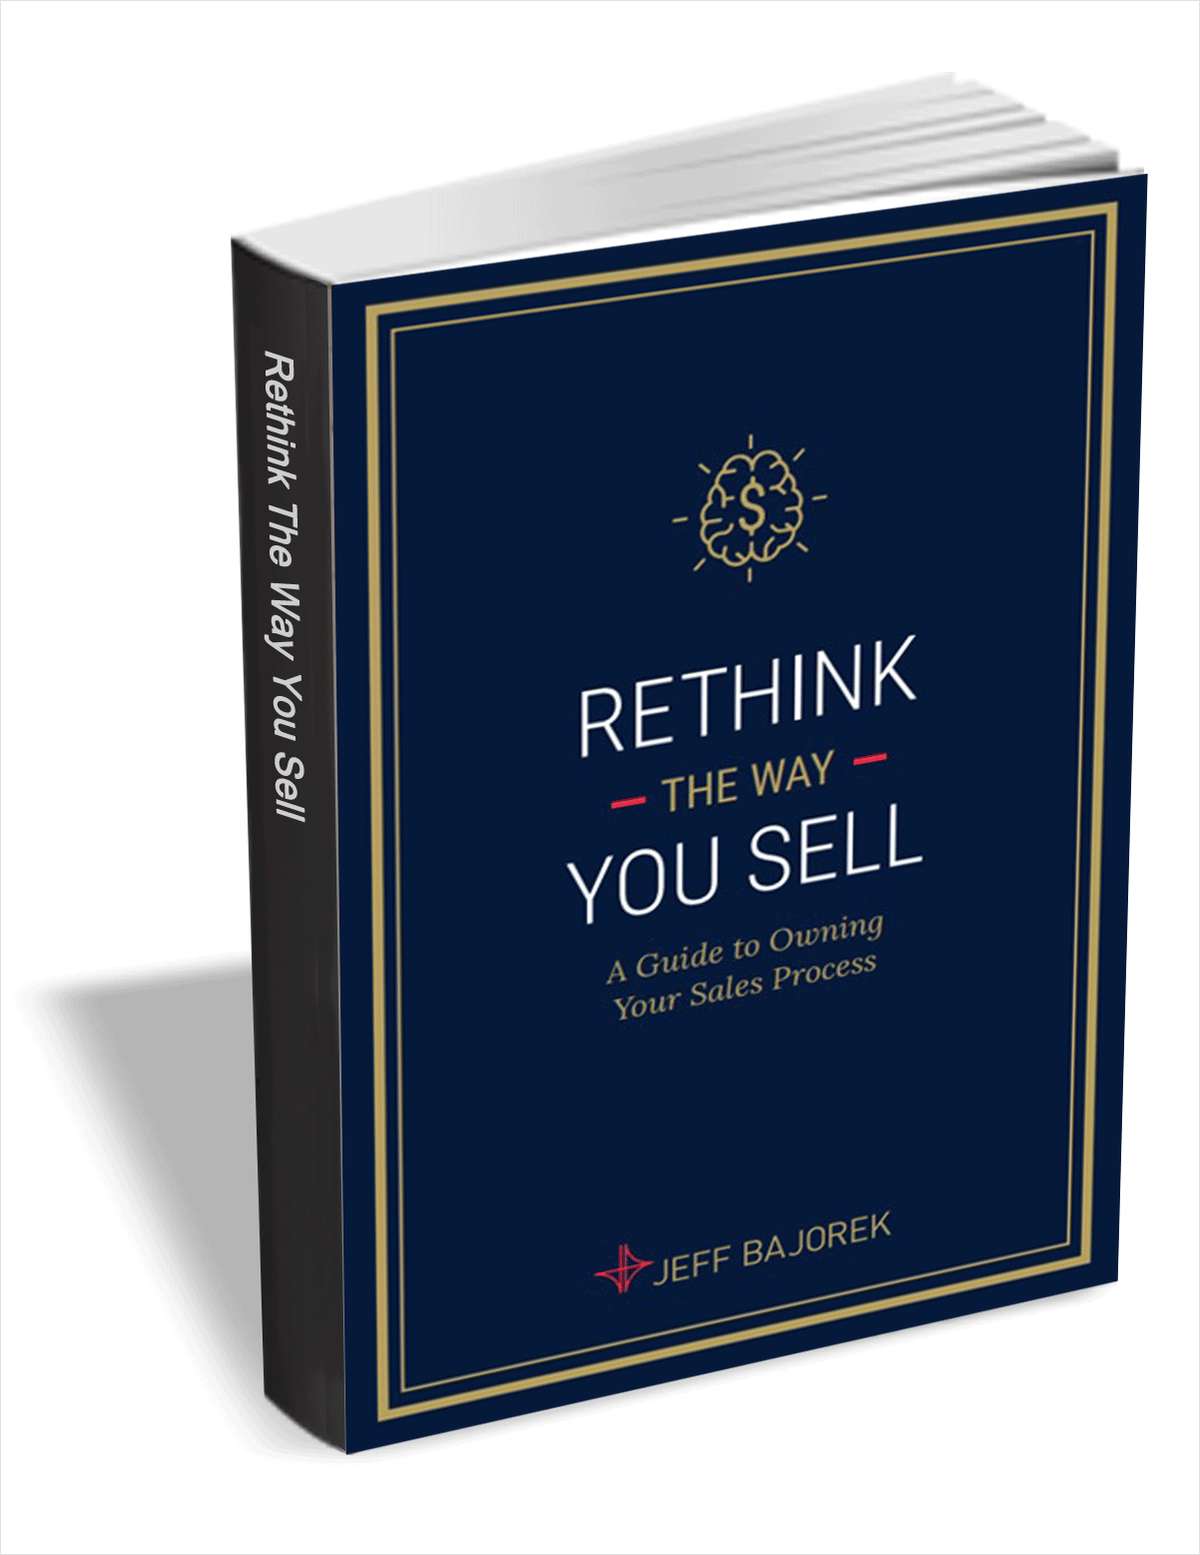 Rethink the Way You Sell - A Guide to Owning Your Sales Process